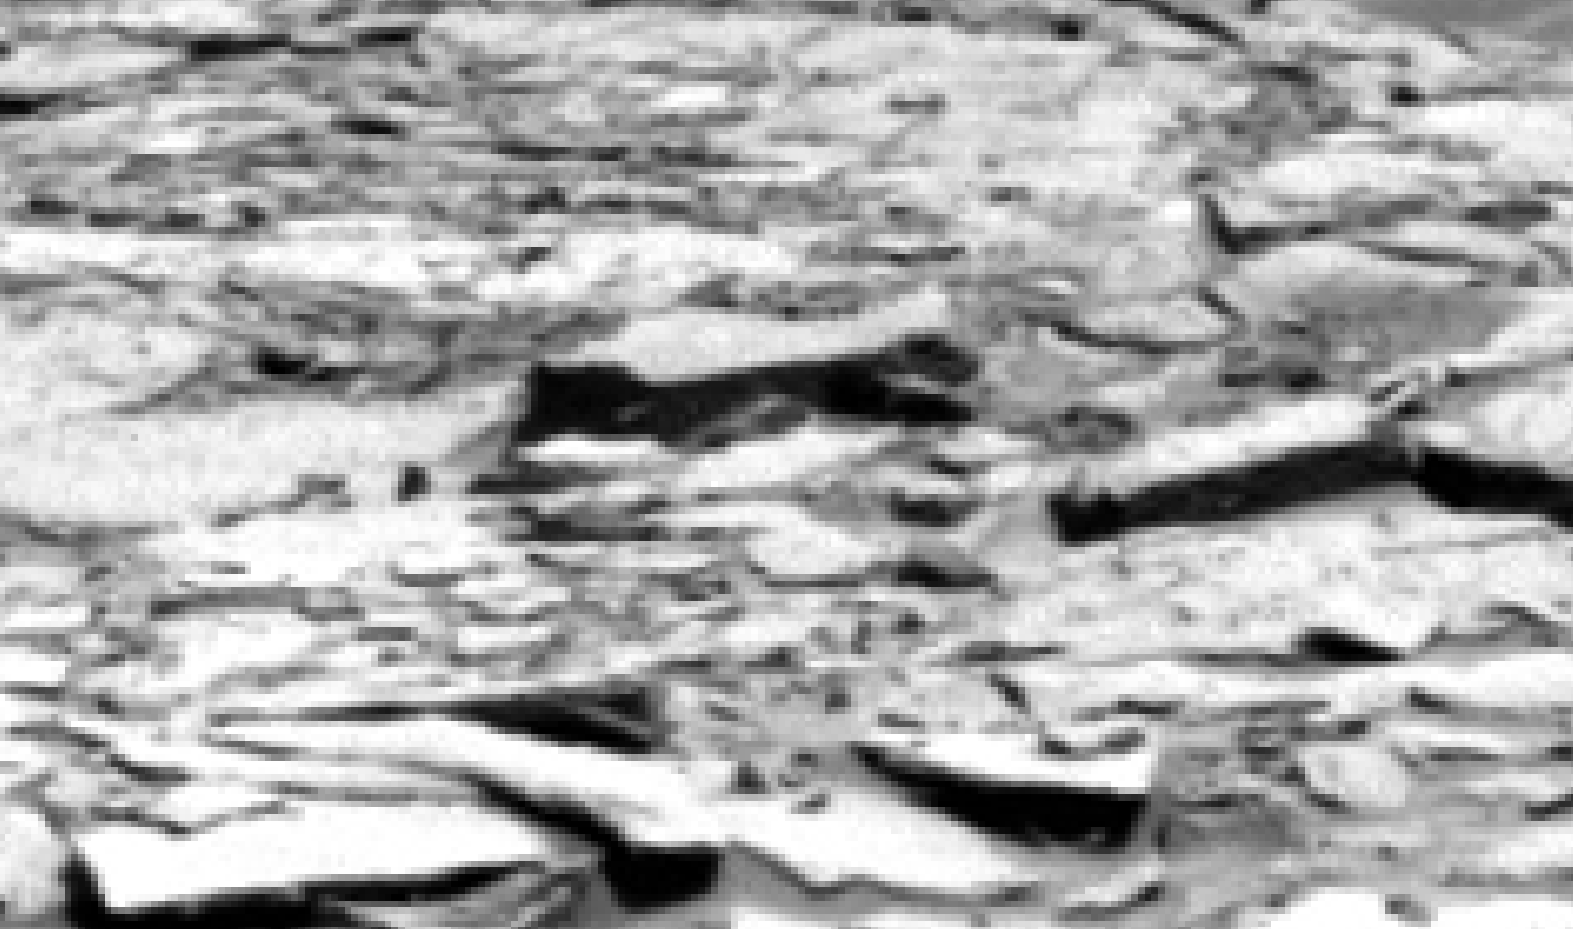 mars sol 1342 anomaly-artifacts 6 was life on mars